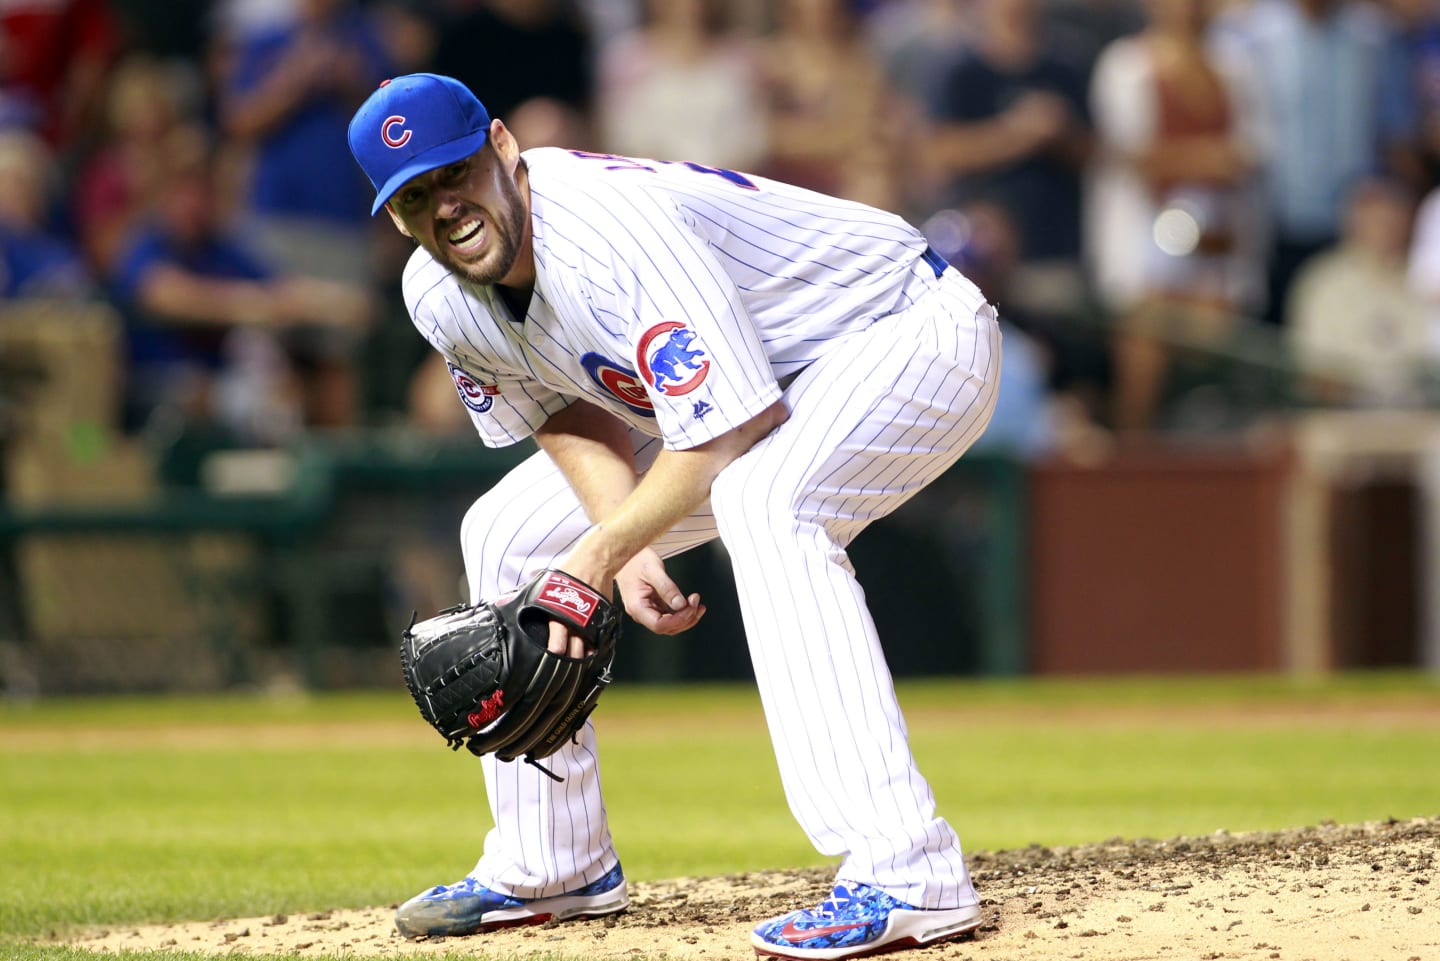 Demoted starter John Lackey blows it for Chicago Cubs' bullpen, Sports